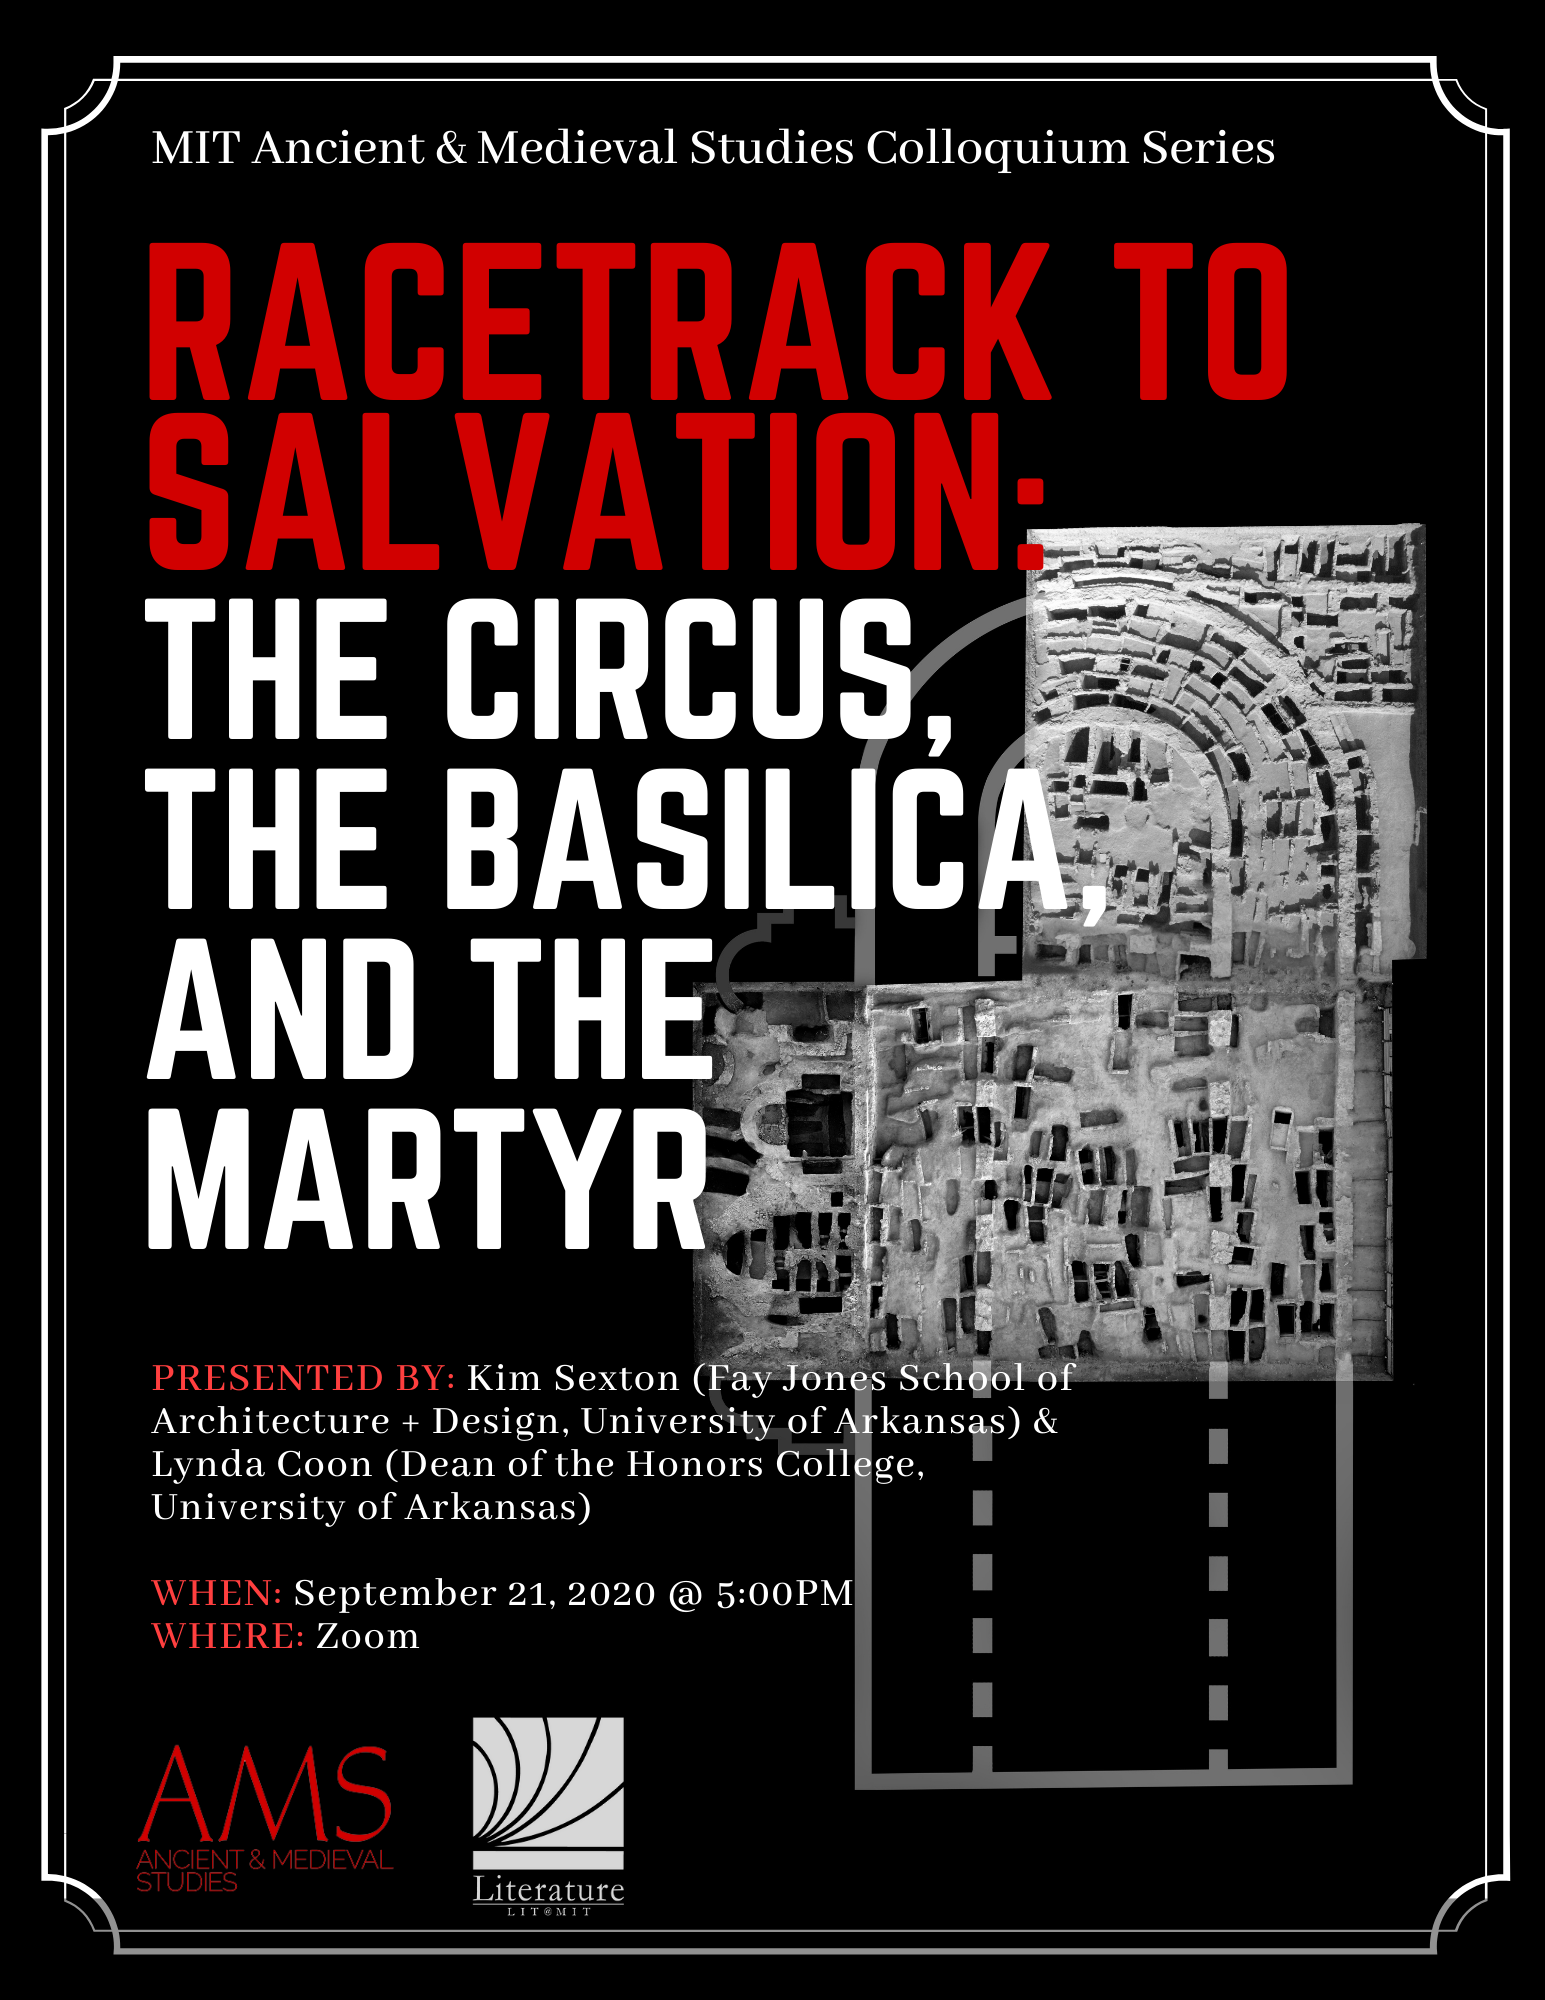 AMS Colloquium Presents: Racetrack to Salvation: The Circus, The Basilica, and the Martyr